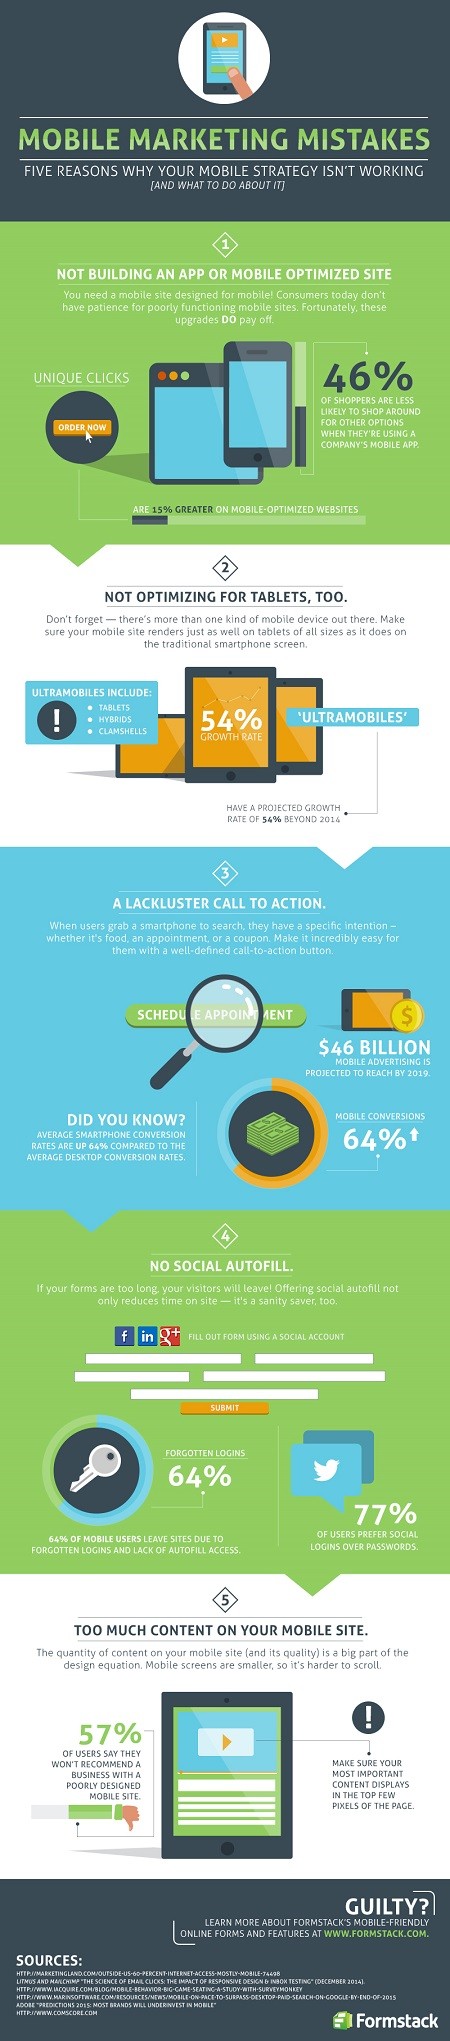 5-mobile-marketing-mistakes-to-avoid-infographic-image